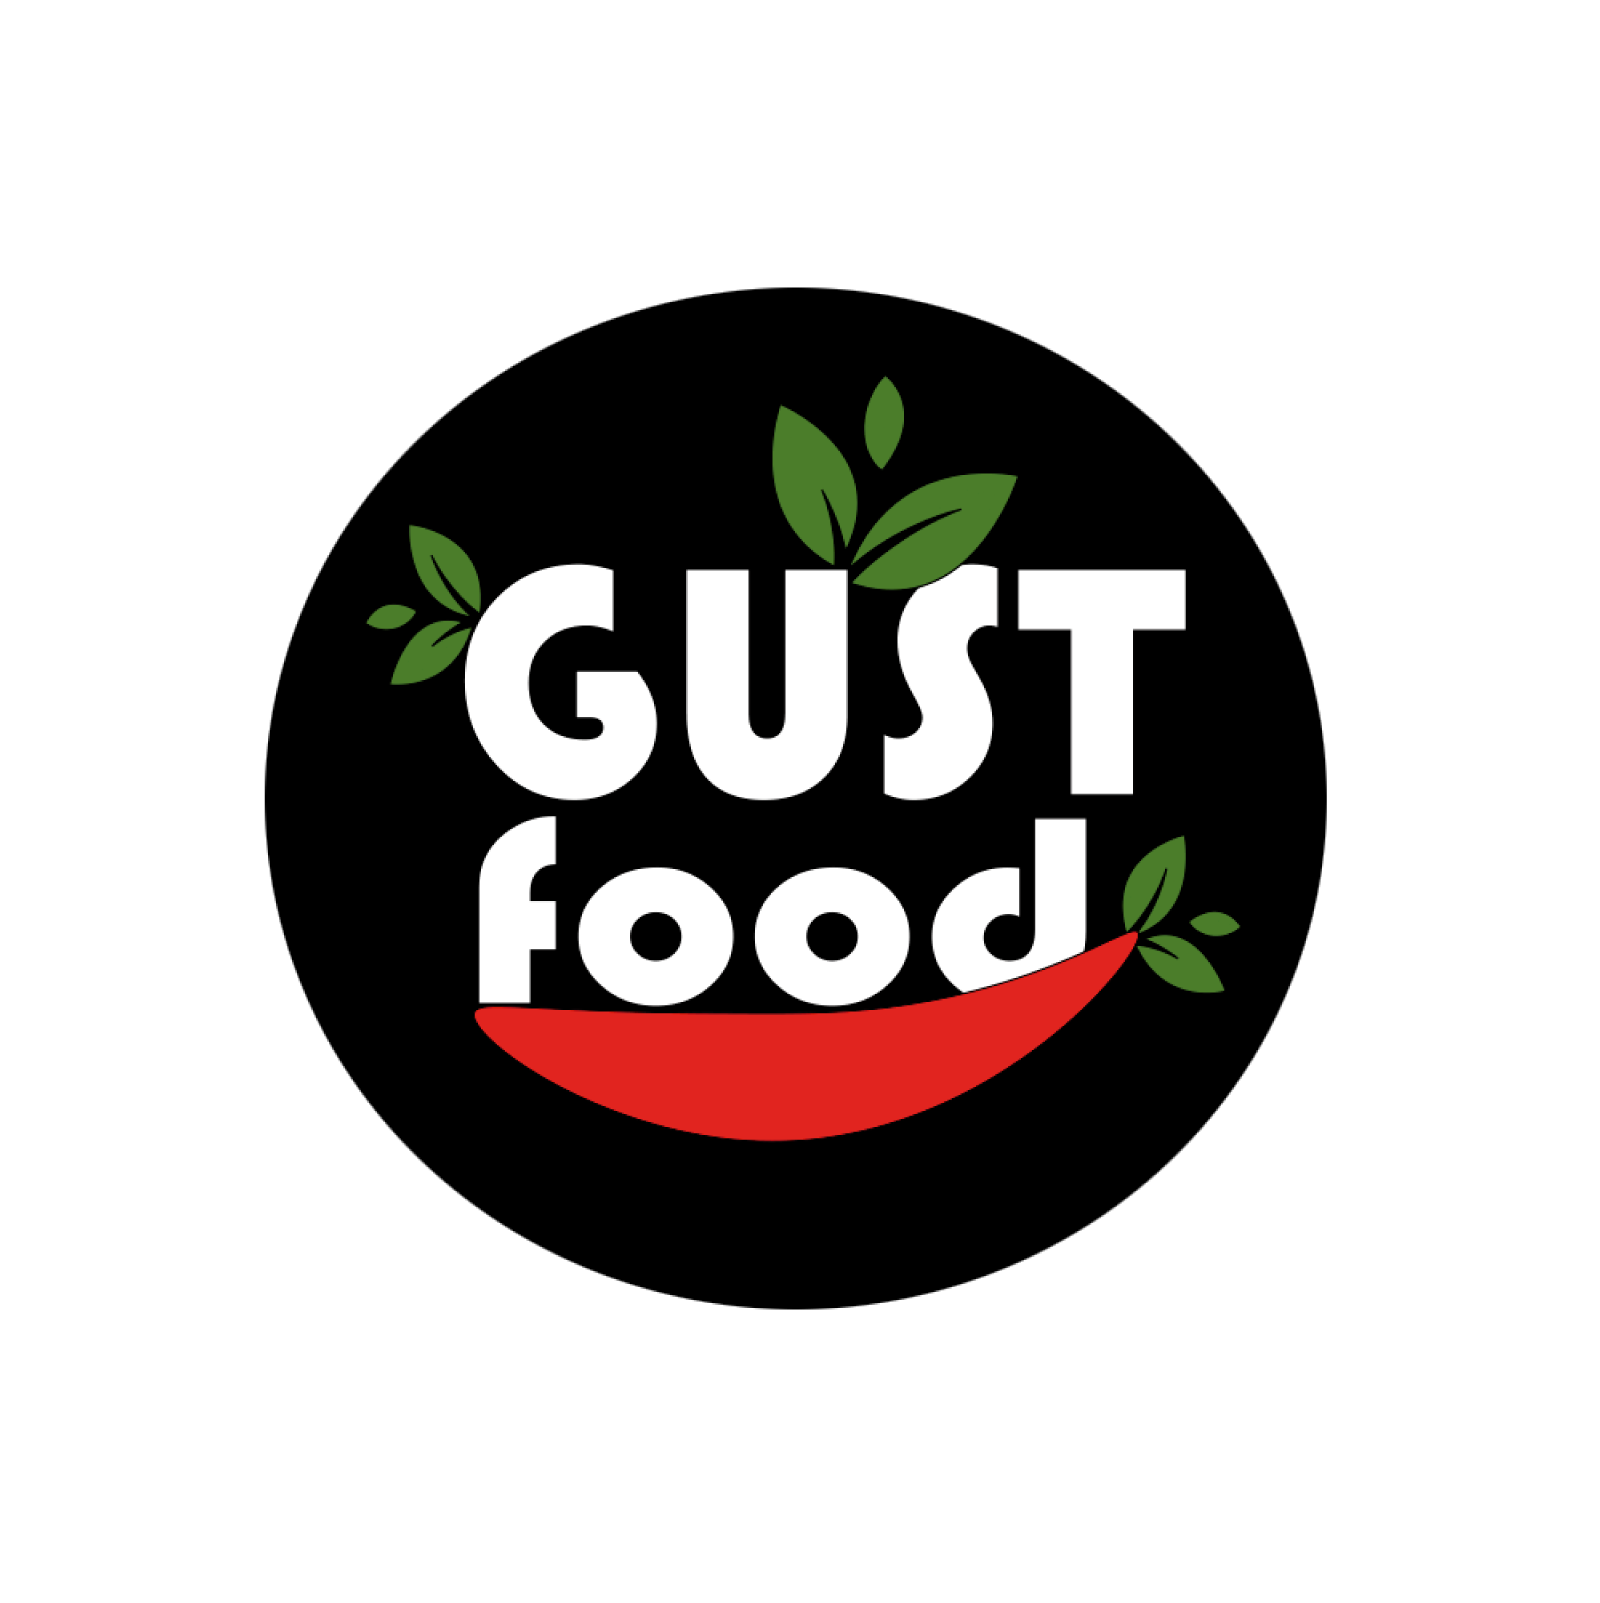 LOGO Gust canal Food